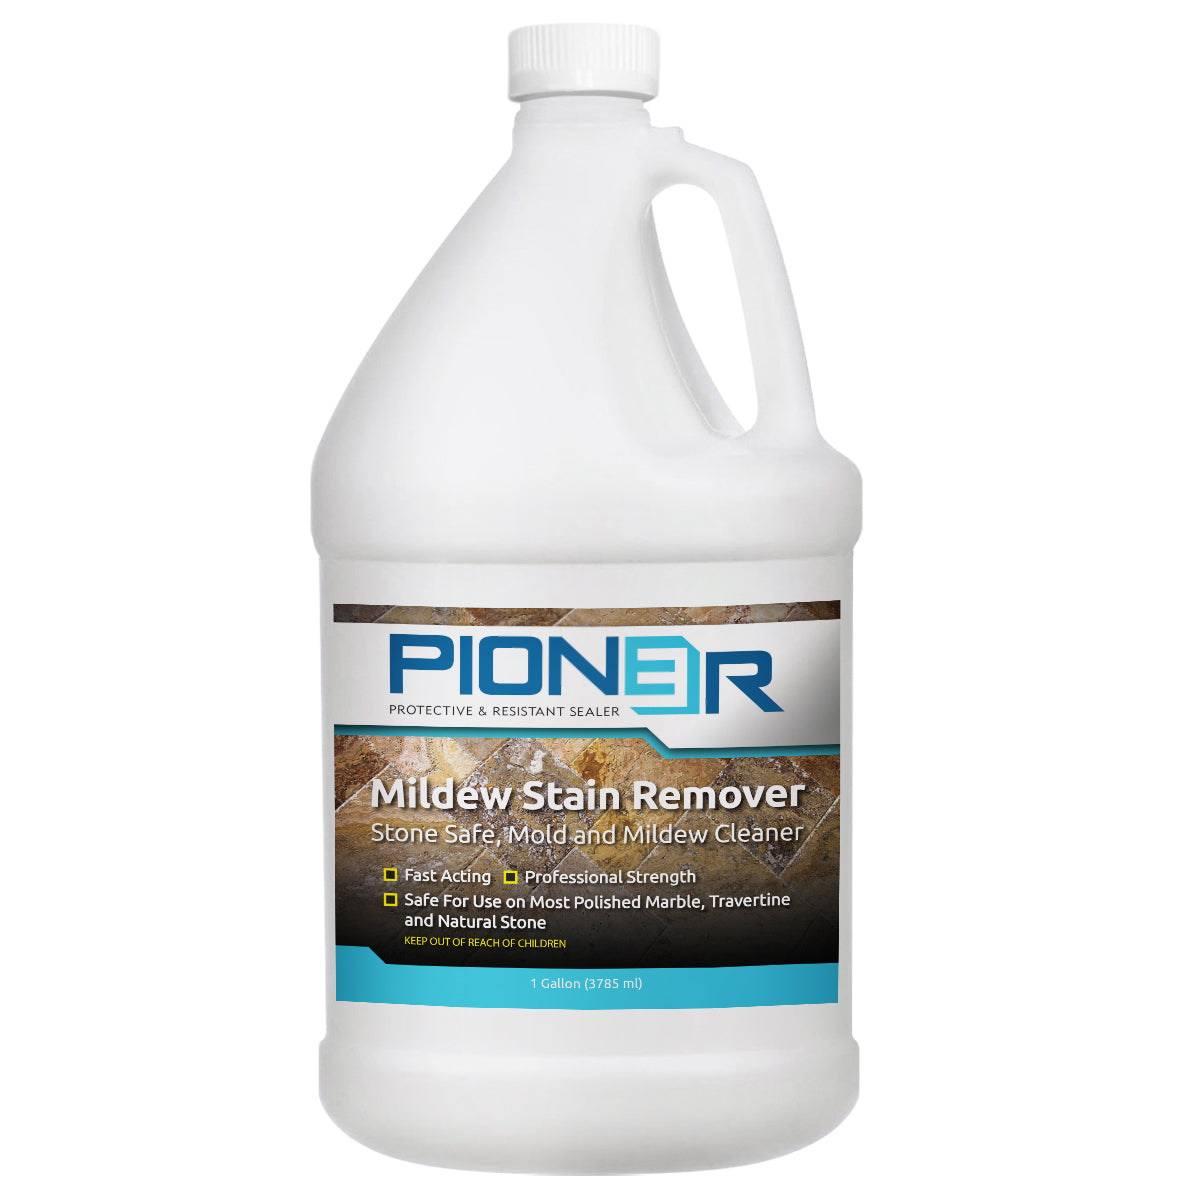 Mildew Remover For Natural Stone I Mold & Mildew Remover